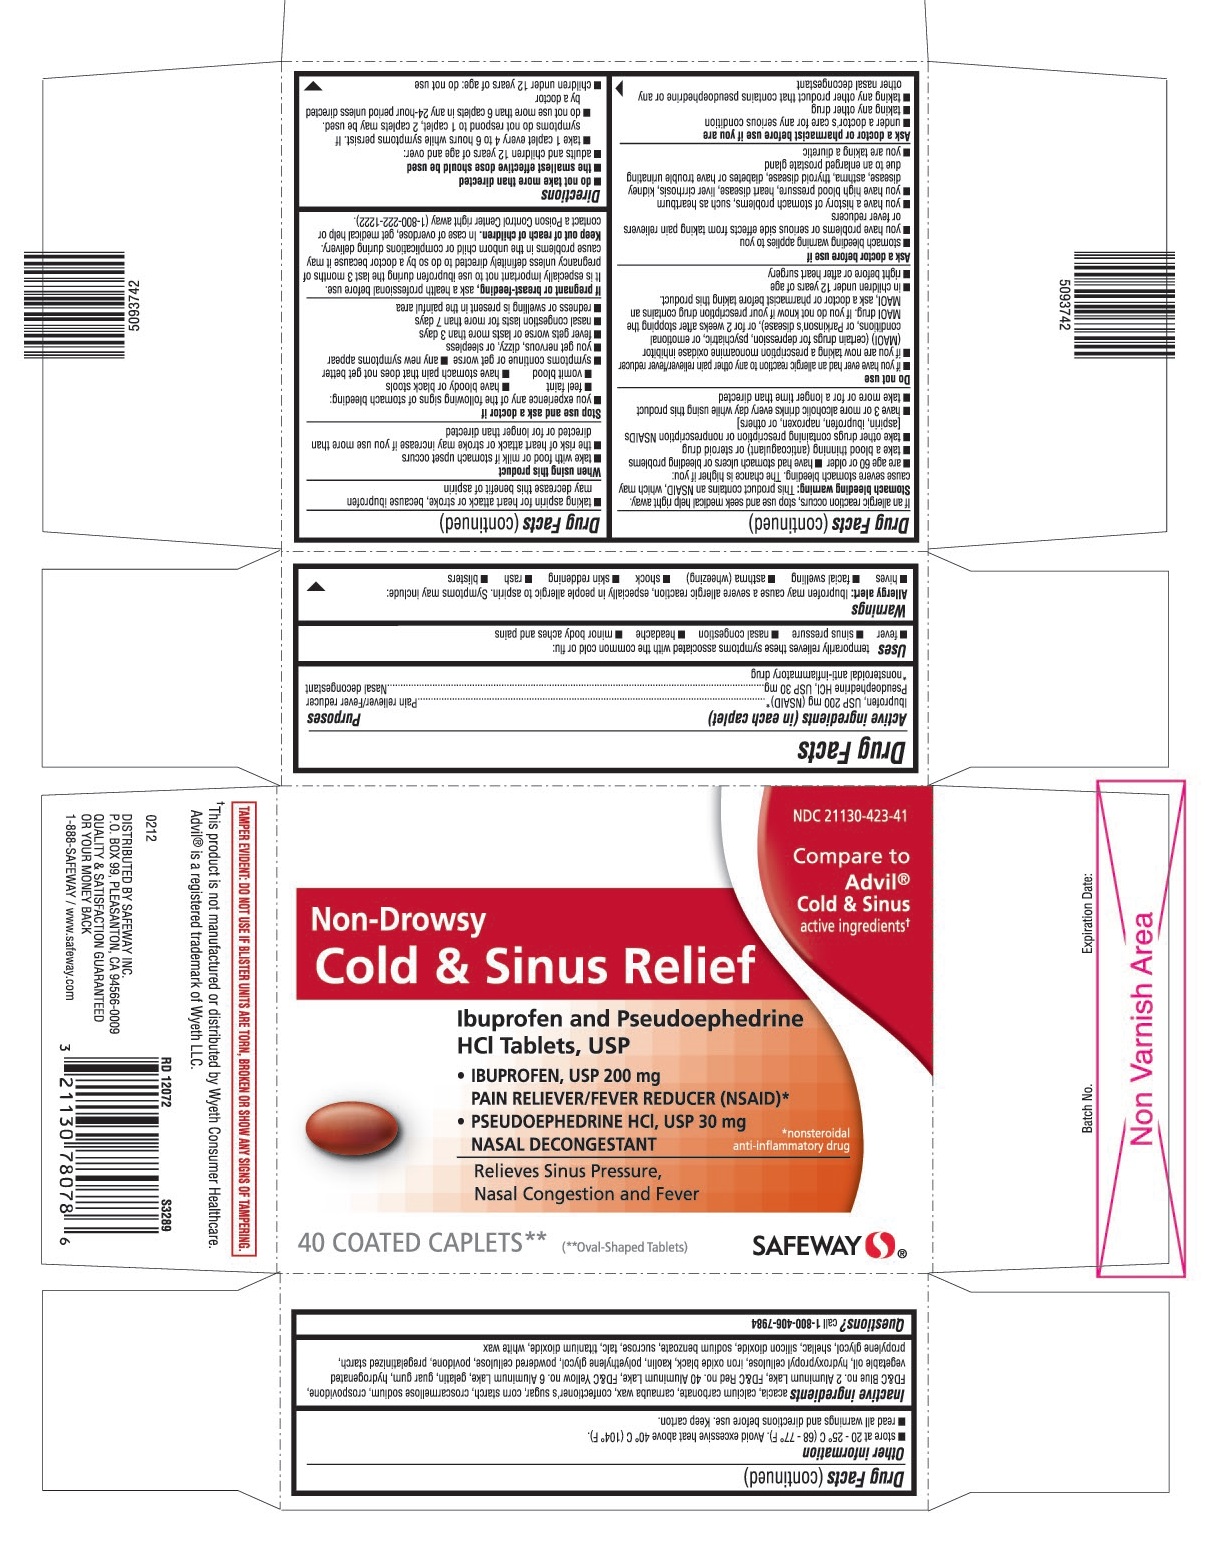 This is the 40 count blister carton label for Safeway Ibuprofen and Pseudoephedrine HCl tablets, USP.